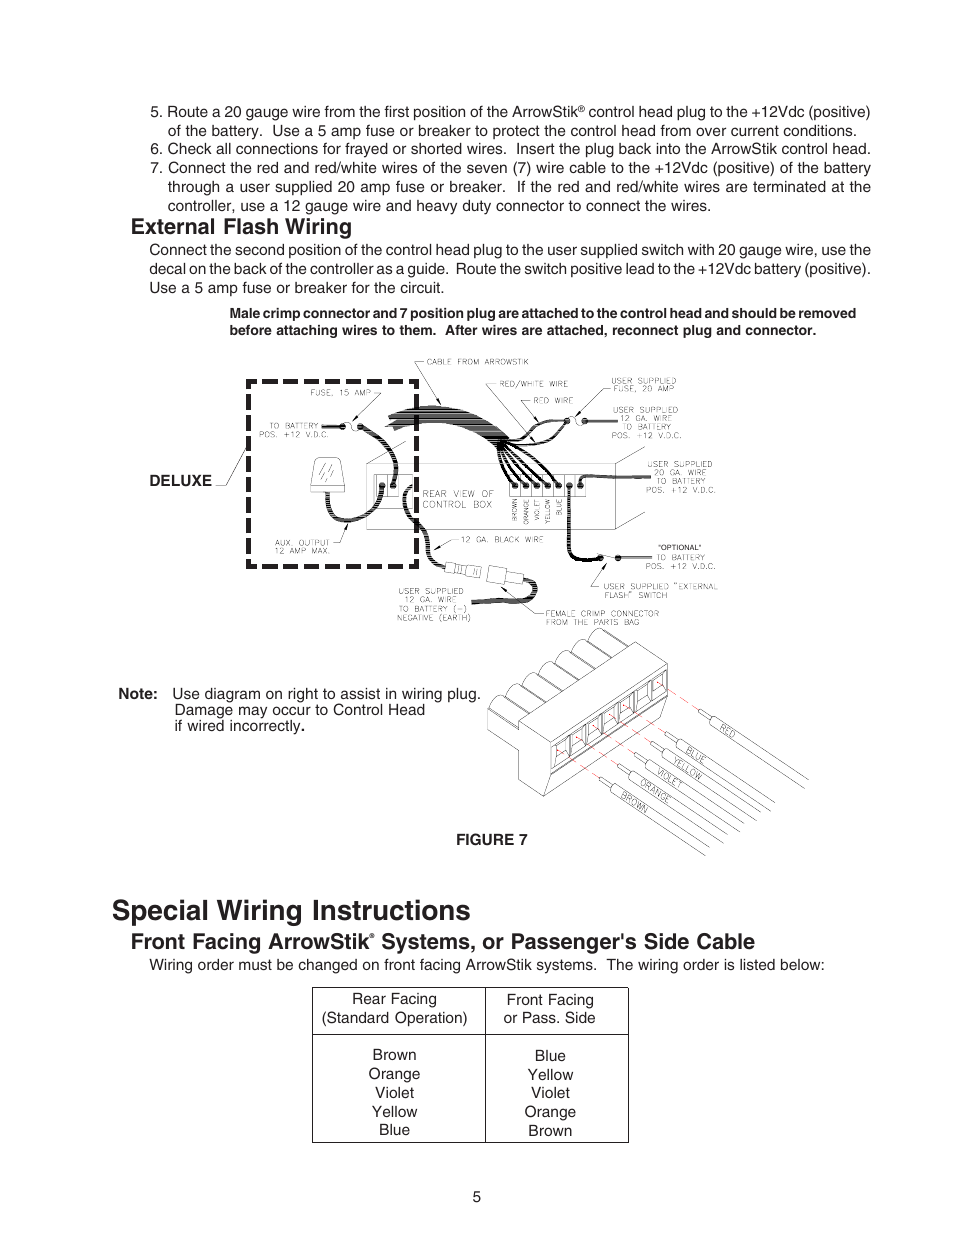 Special wiring instructions, External flash wiring, Front facing